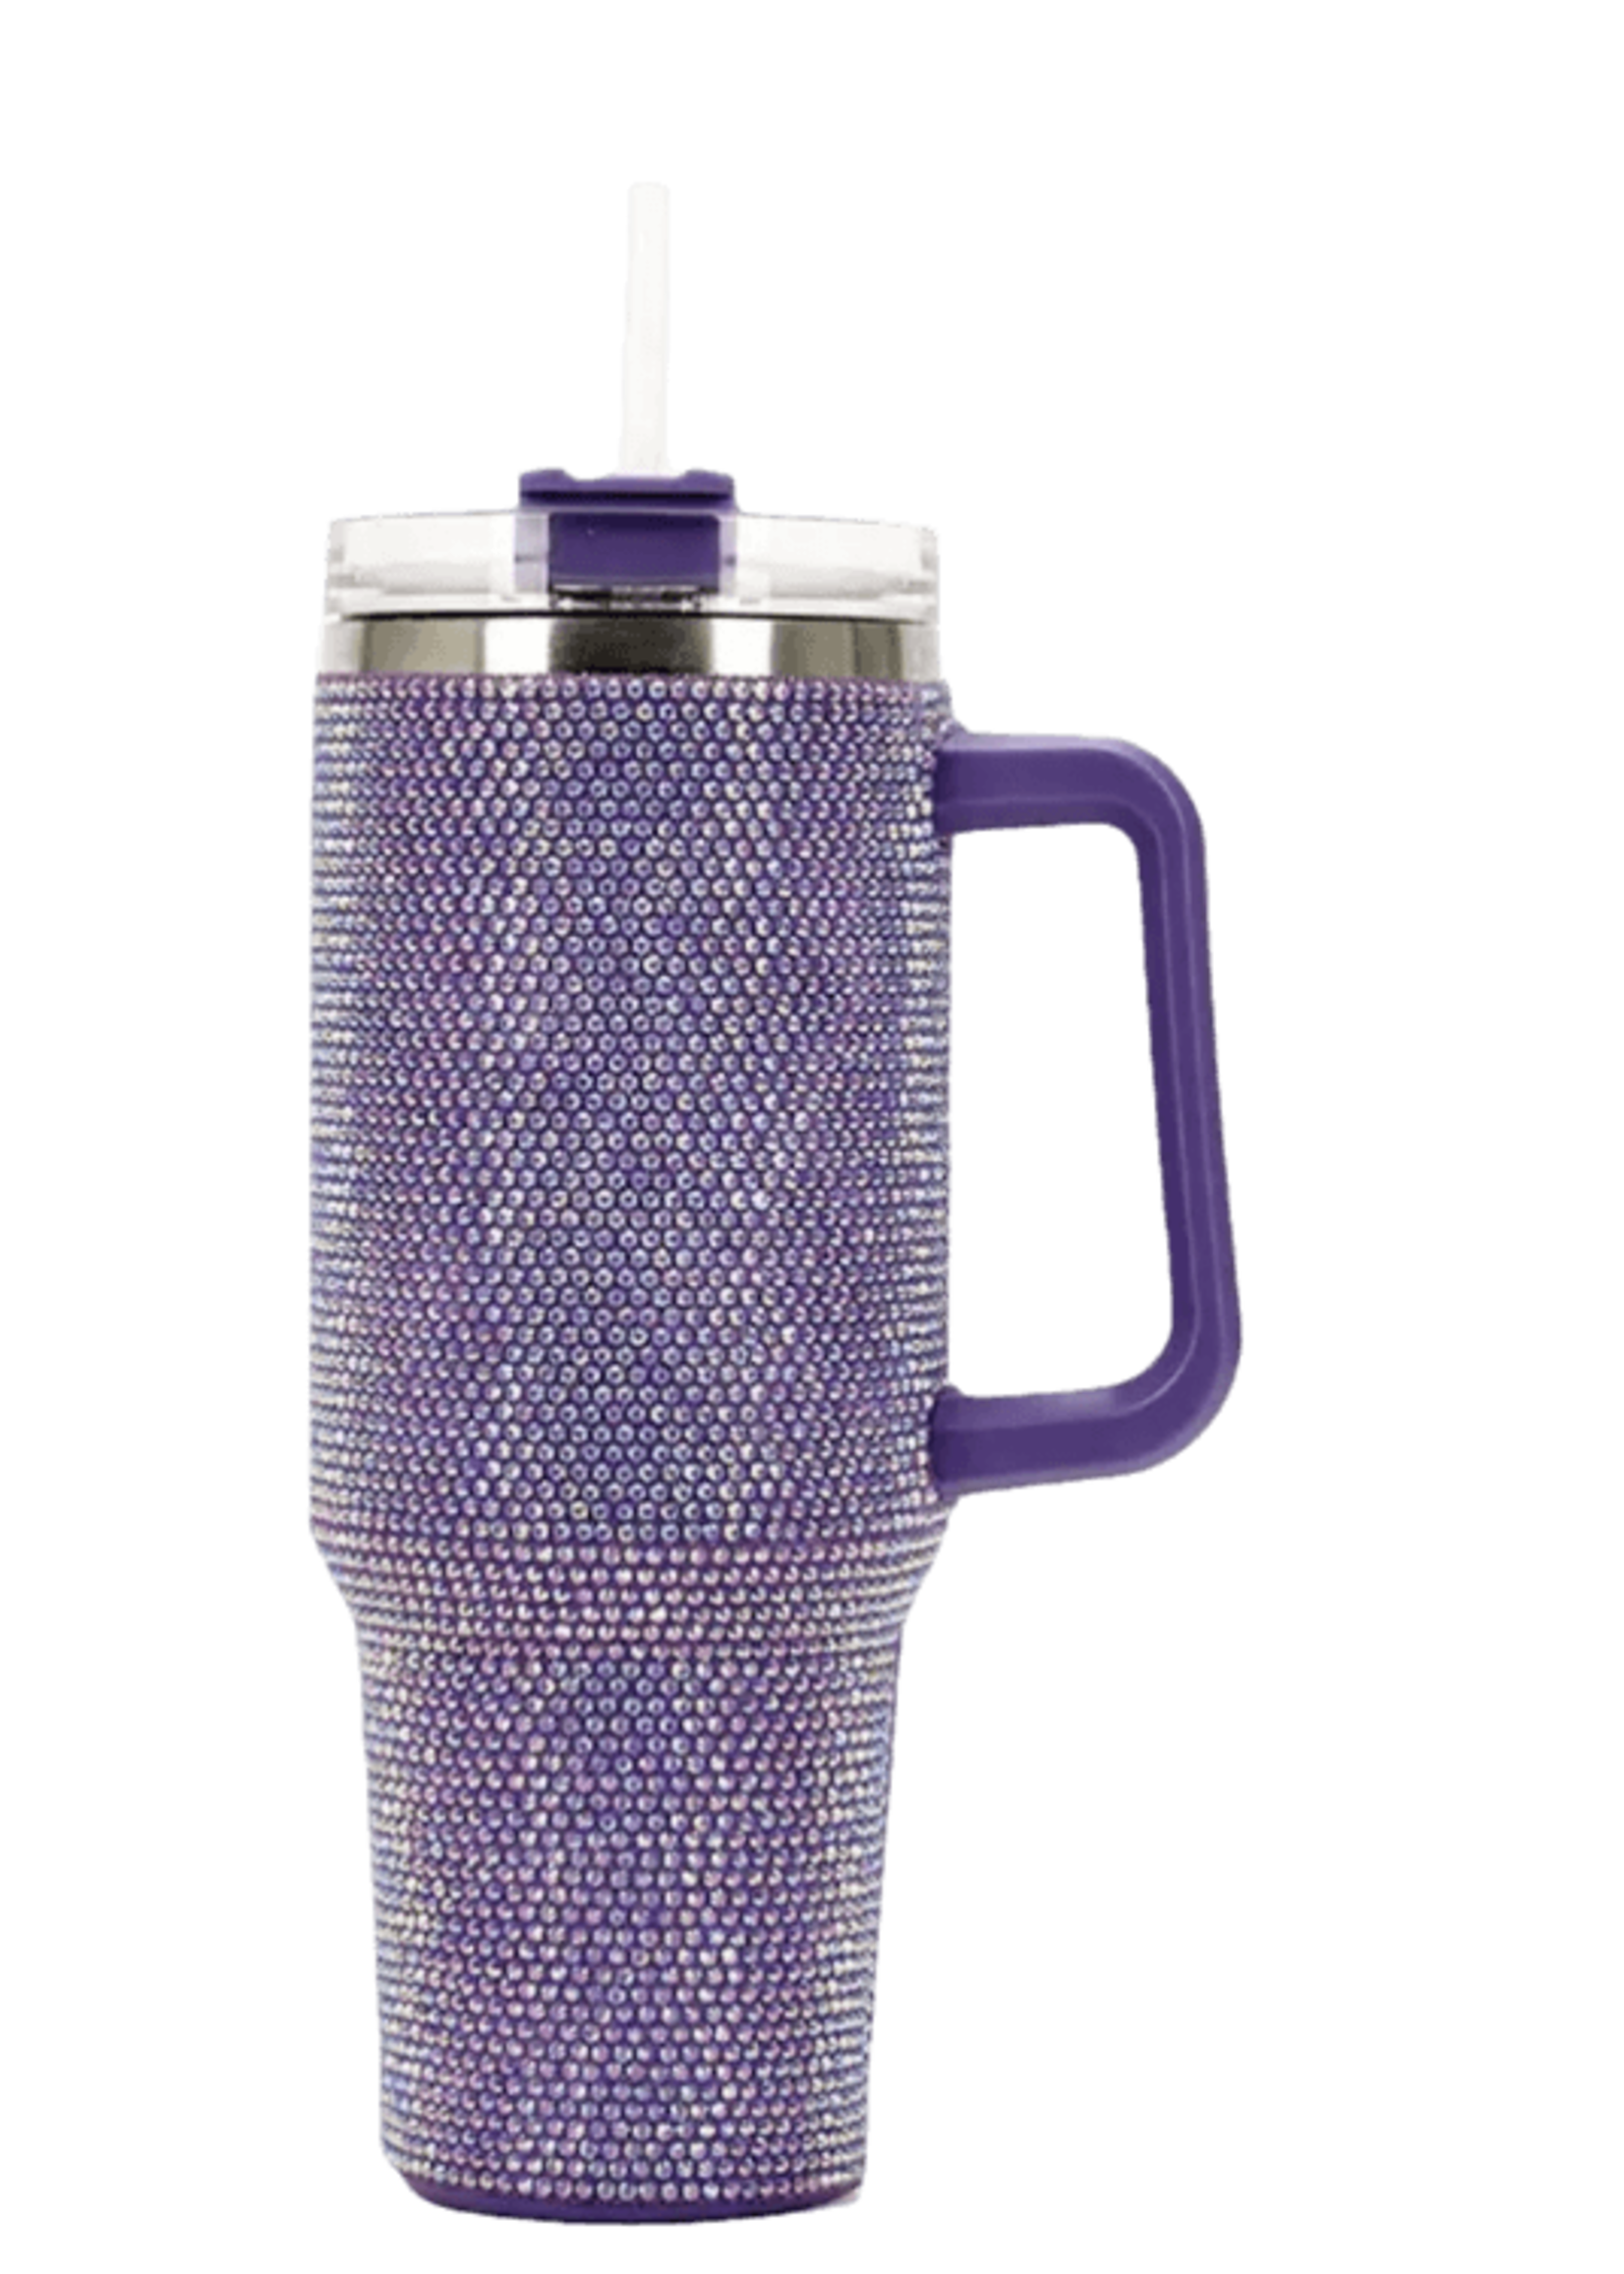 Bedazzled Tumblers